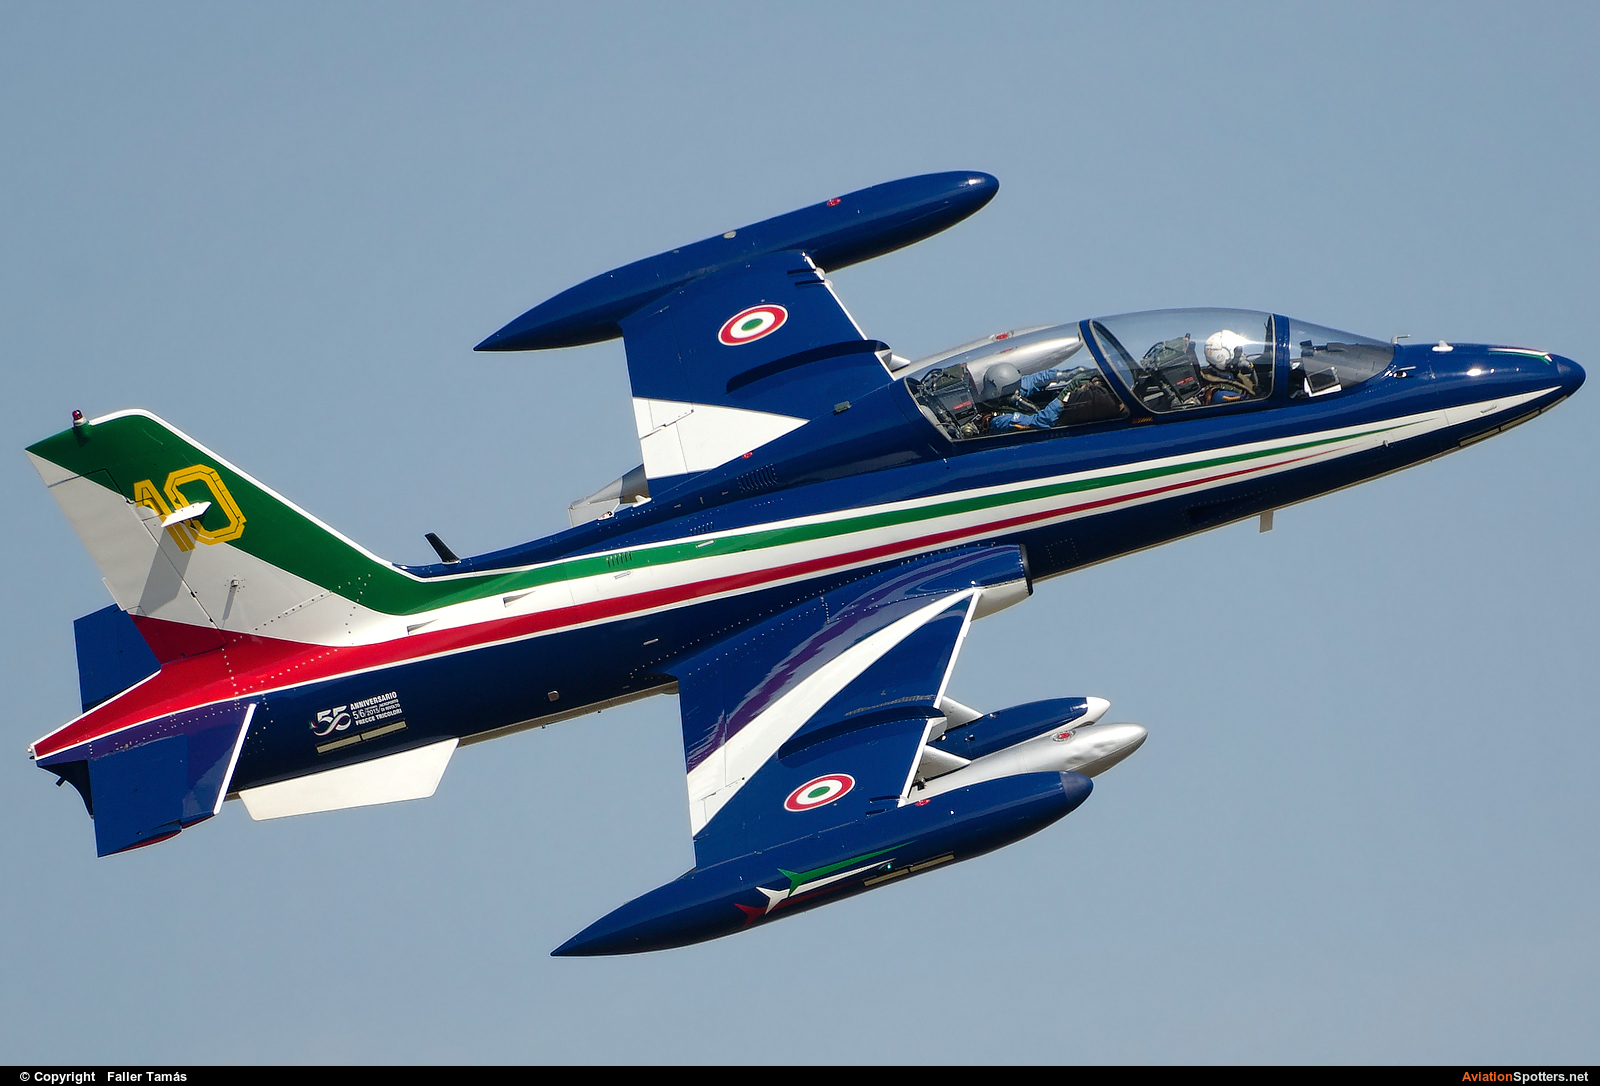 Italy - Air Force : Frecce Tricolori  -  MB-339-A-PAN  (MM54500) By Faller Tamás (fallto78)